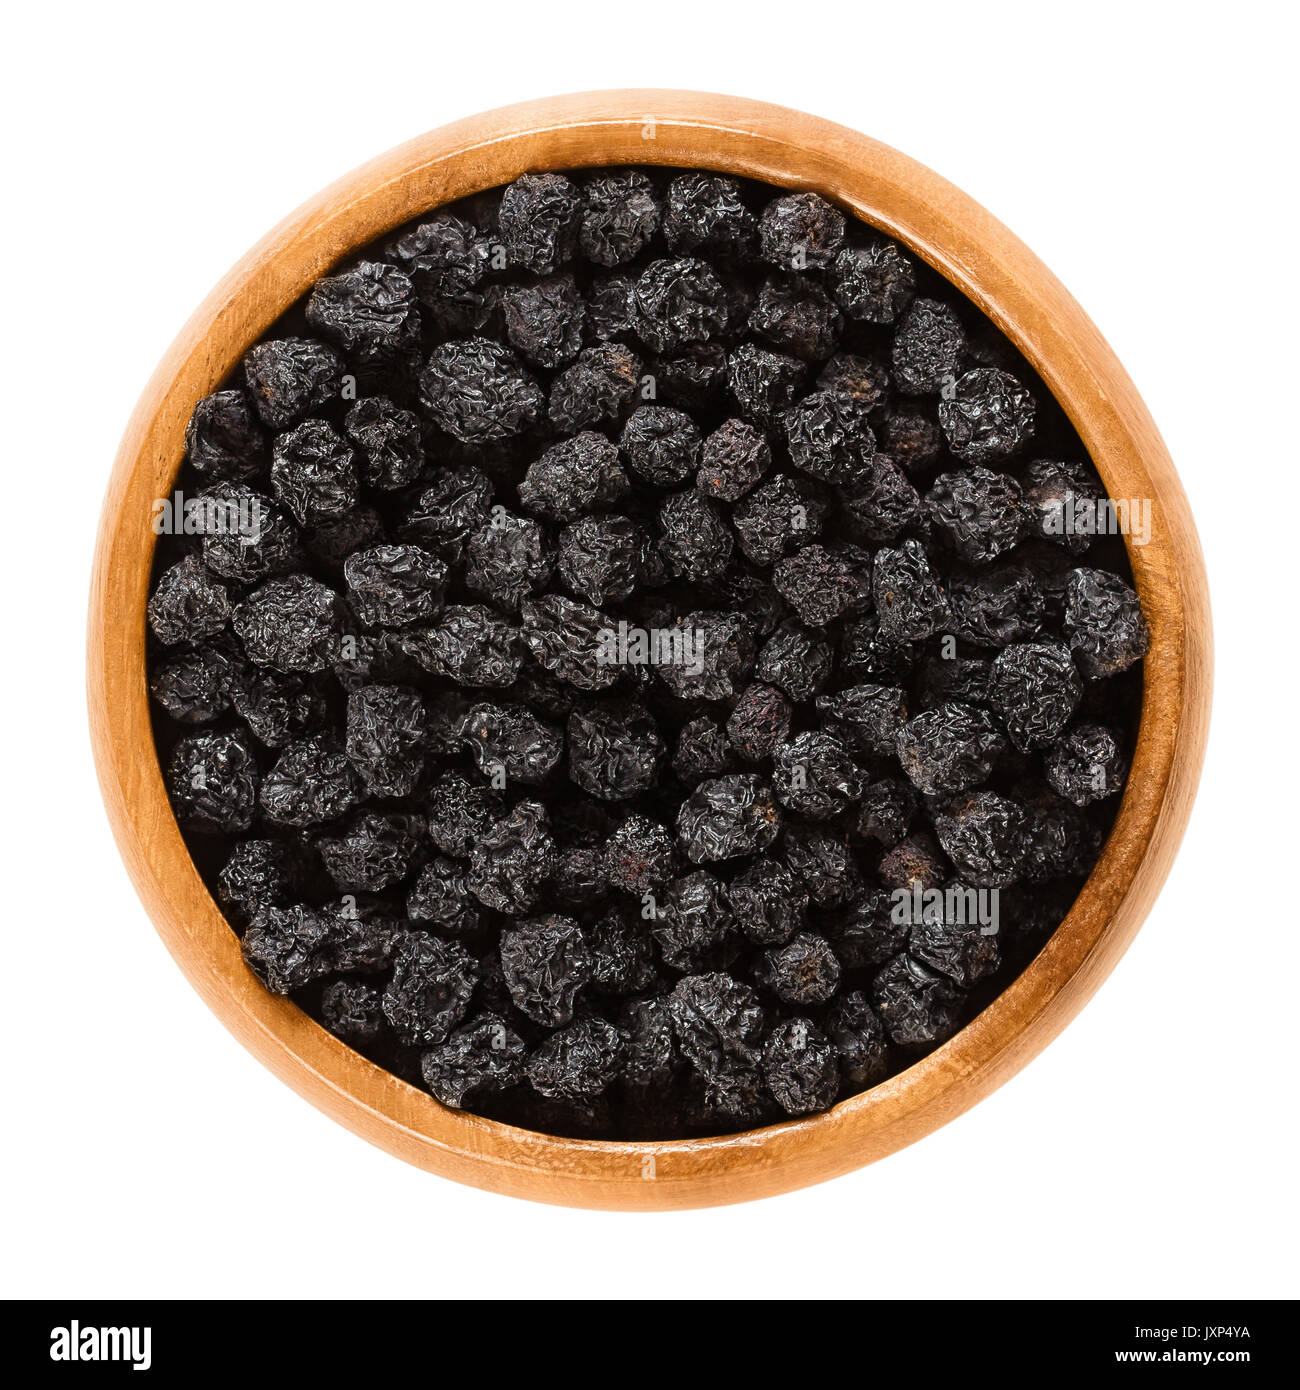 Aronia berries in wooden bowl. Dried ripe black chokeberries, Aronia melanocarpa. The Fruits are used as flavoring or colorant. Macro food photo. Stock Photo